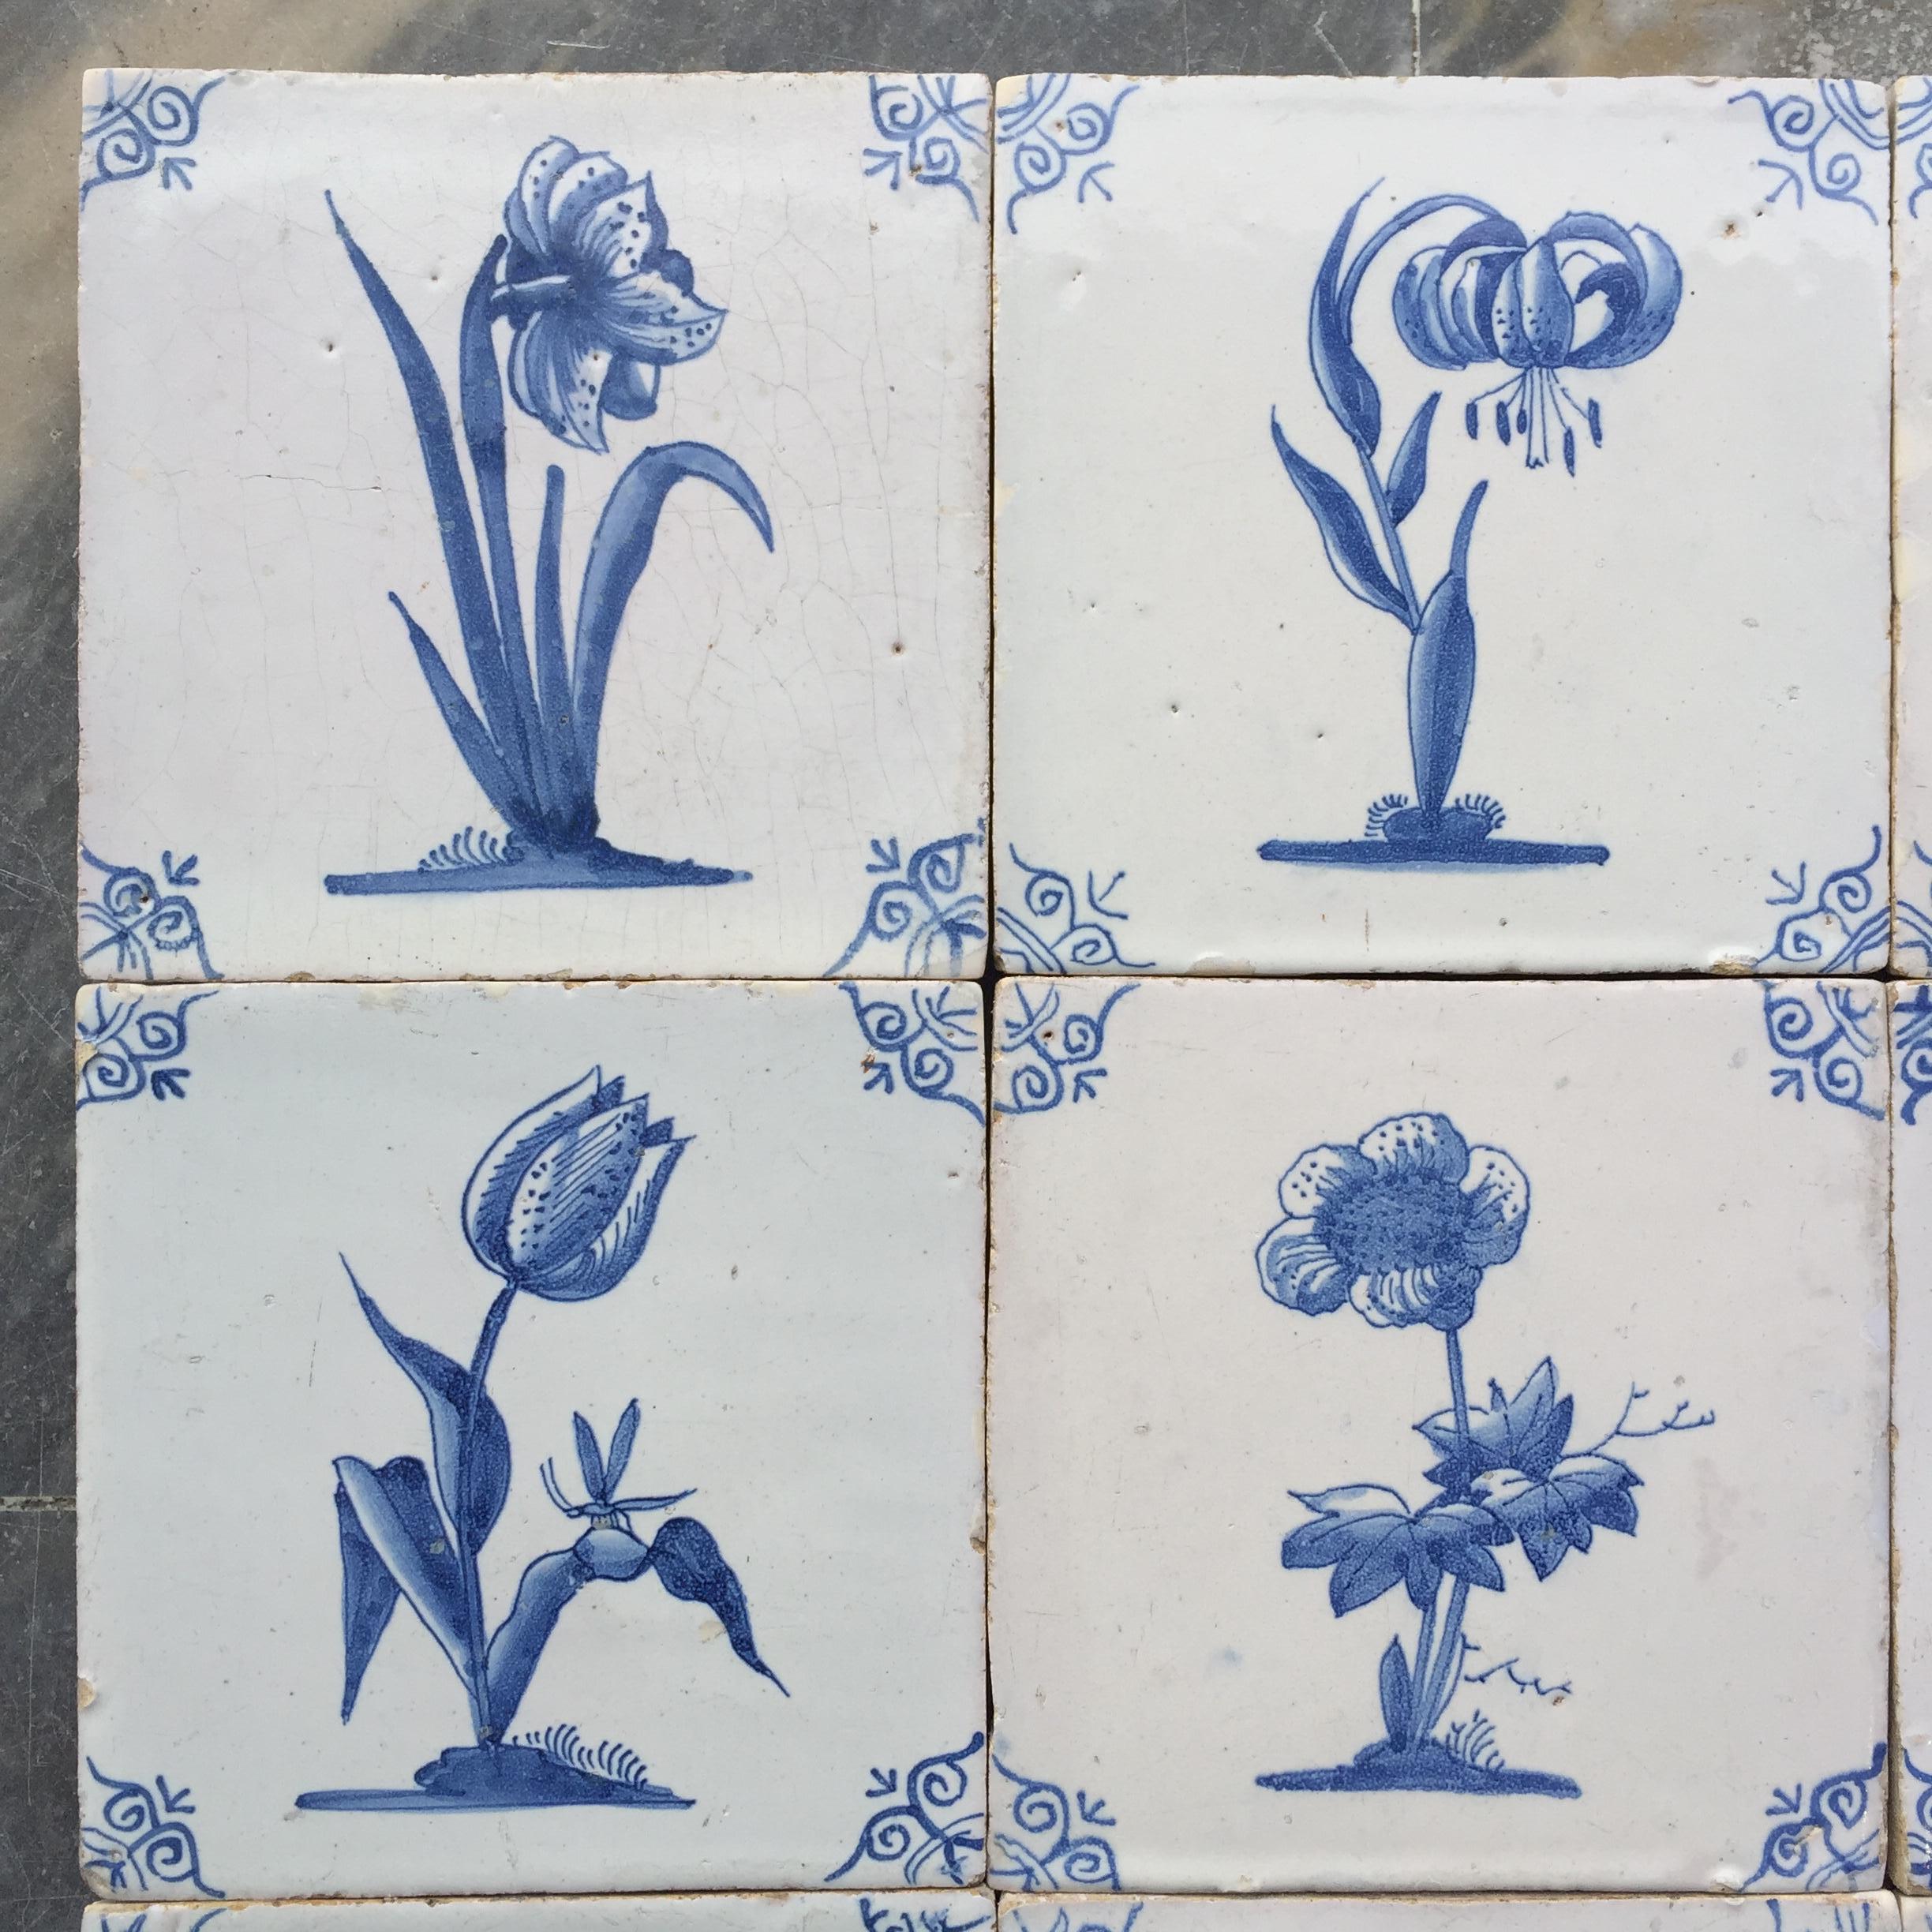 A rare set of 12 blue and white Dutch Delft tiles with flowers and insects.
Made in Amsterdam, The Netherlands.
Circa 1680.

This set of tiles is of very fine quality and has a superb glaze, characteristic for the Amsterdam tile production of